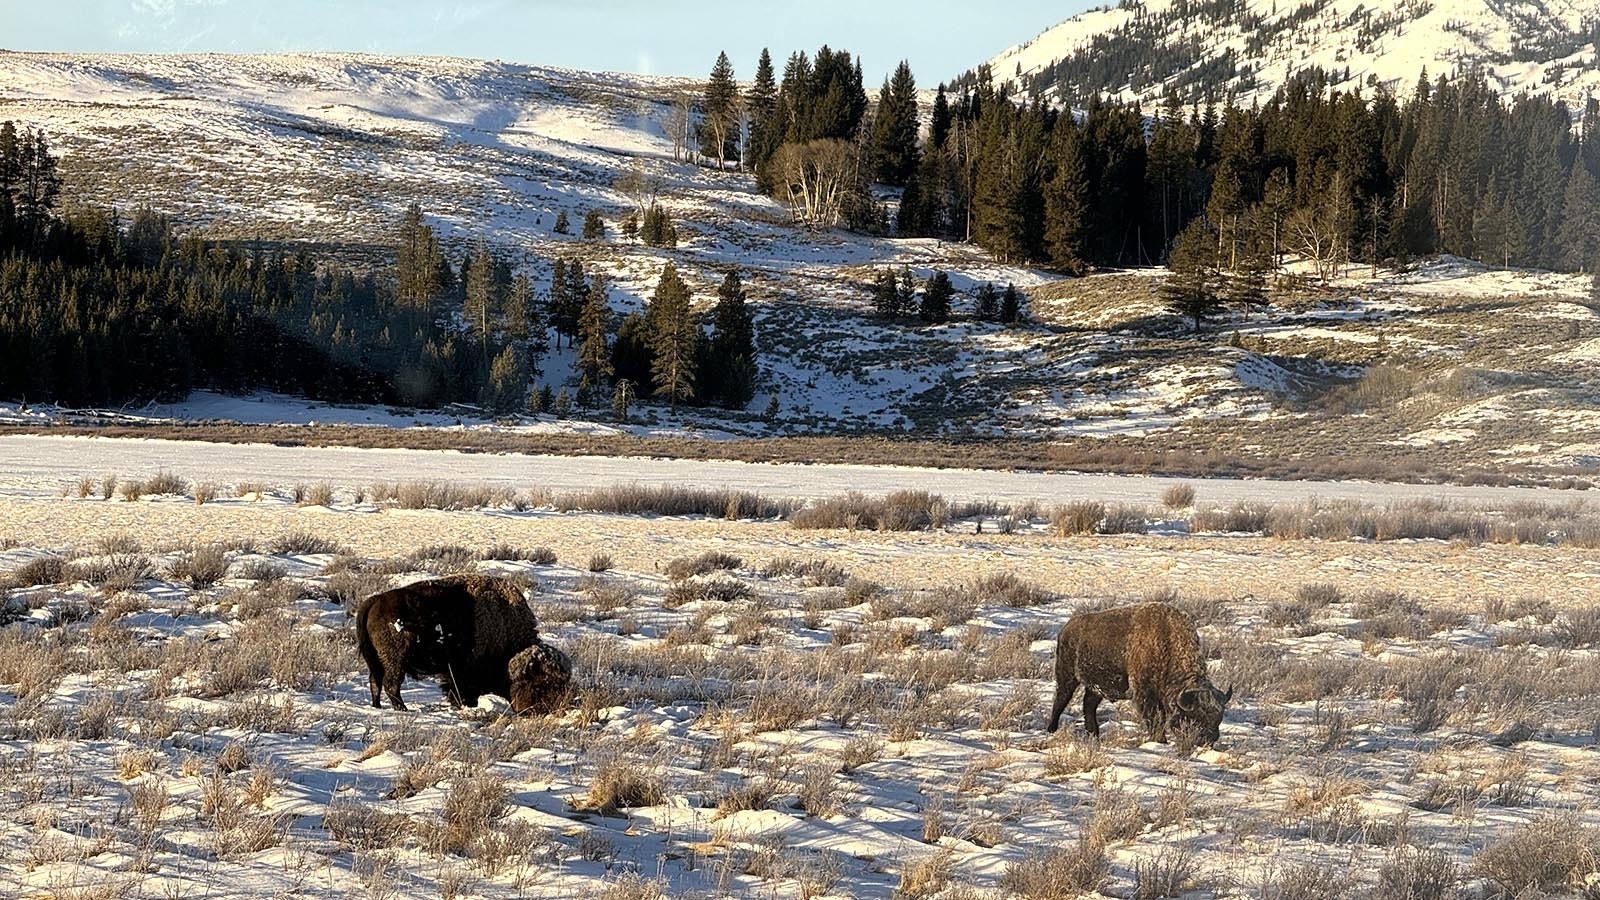 Two bison forage in the snow covering Swan Lake Flats with the Gallatin Range in the background.